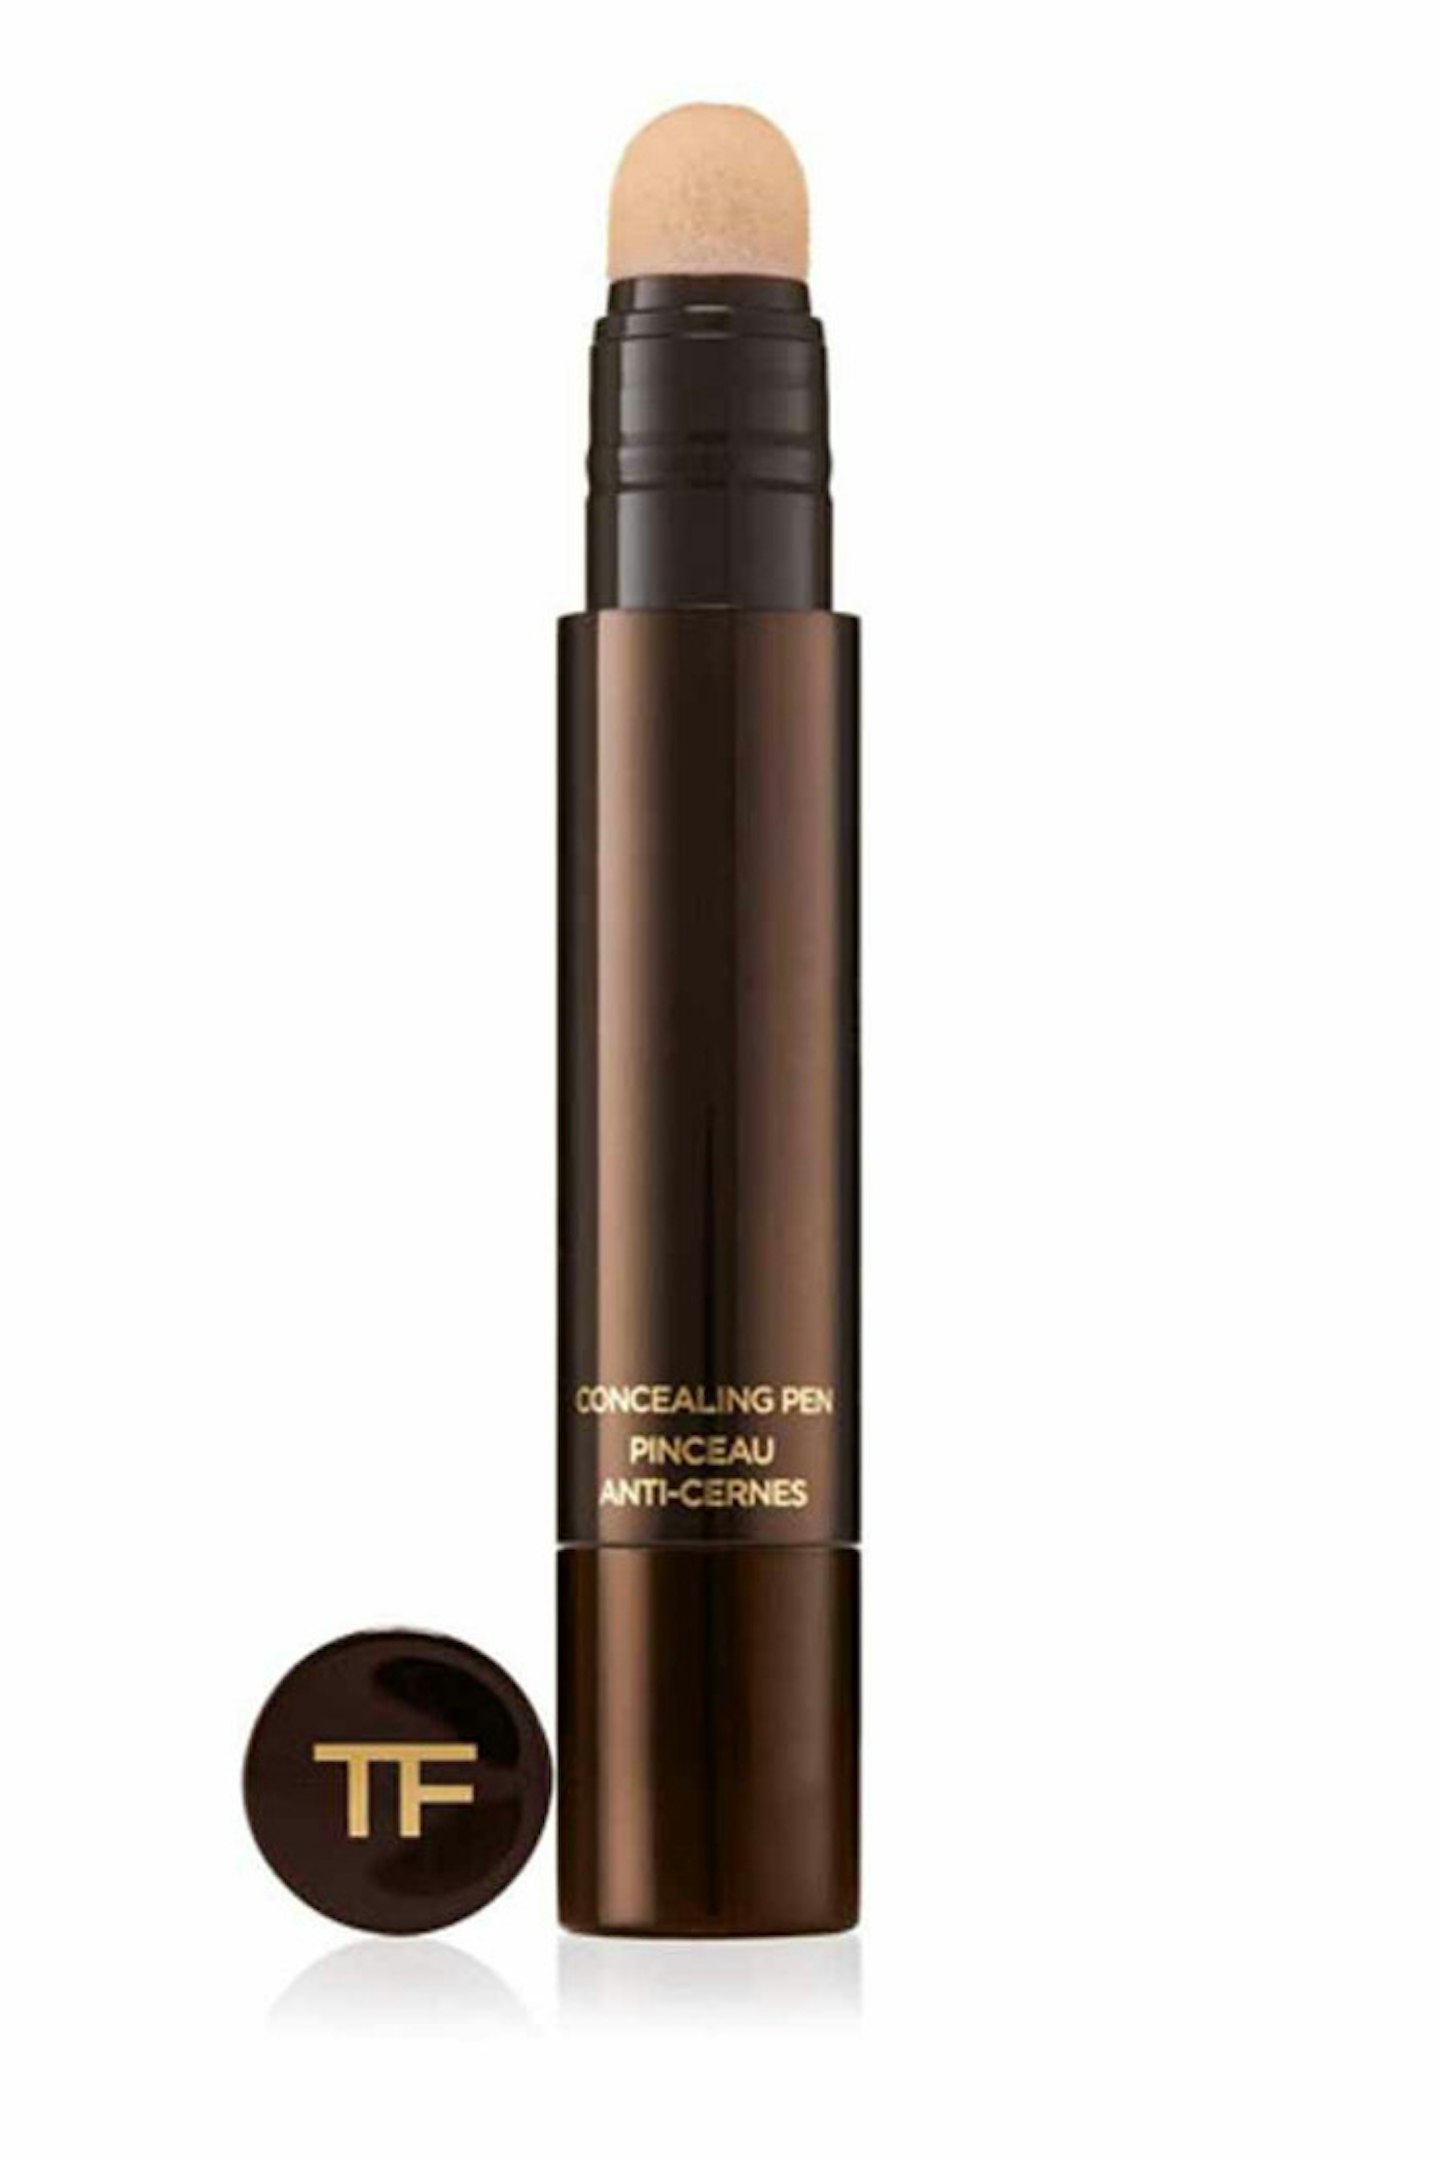 10. Tom Ford Concealing Pen, £40